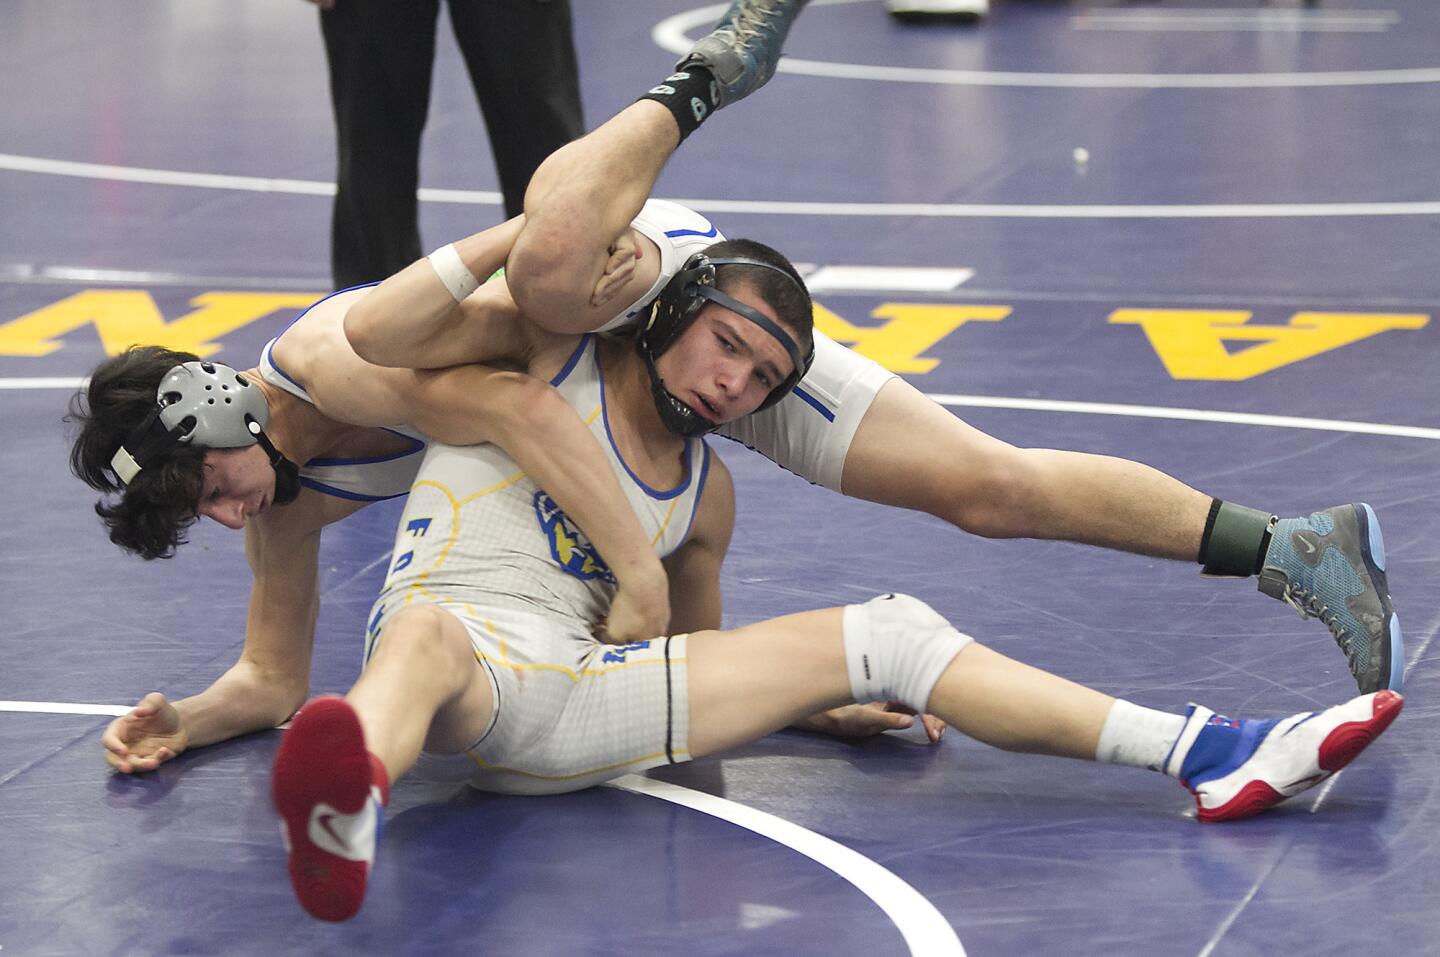 Fountain Valley's Dylan Zotea, makes a move on his opponent in the 126-lb, third place medal match, in the Five Counties Invitational wrestling tournament at Fountain Valley High on Saturday.